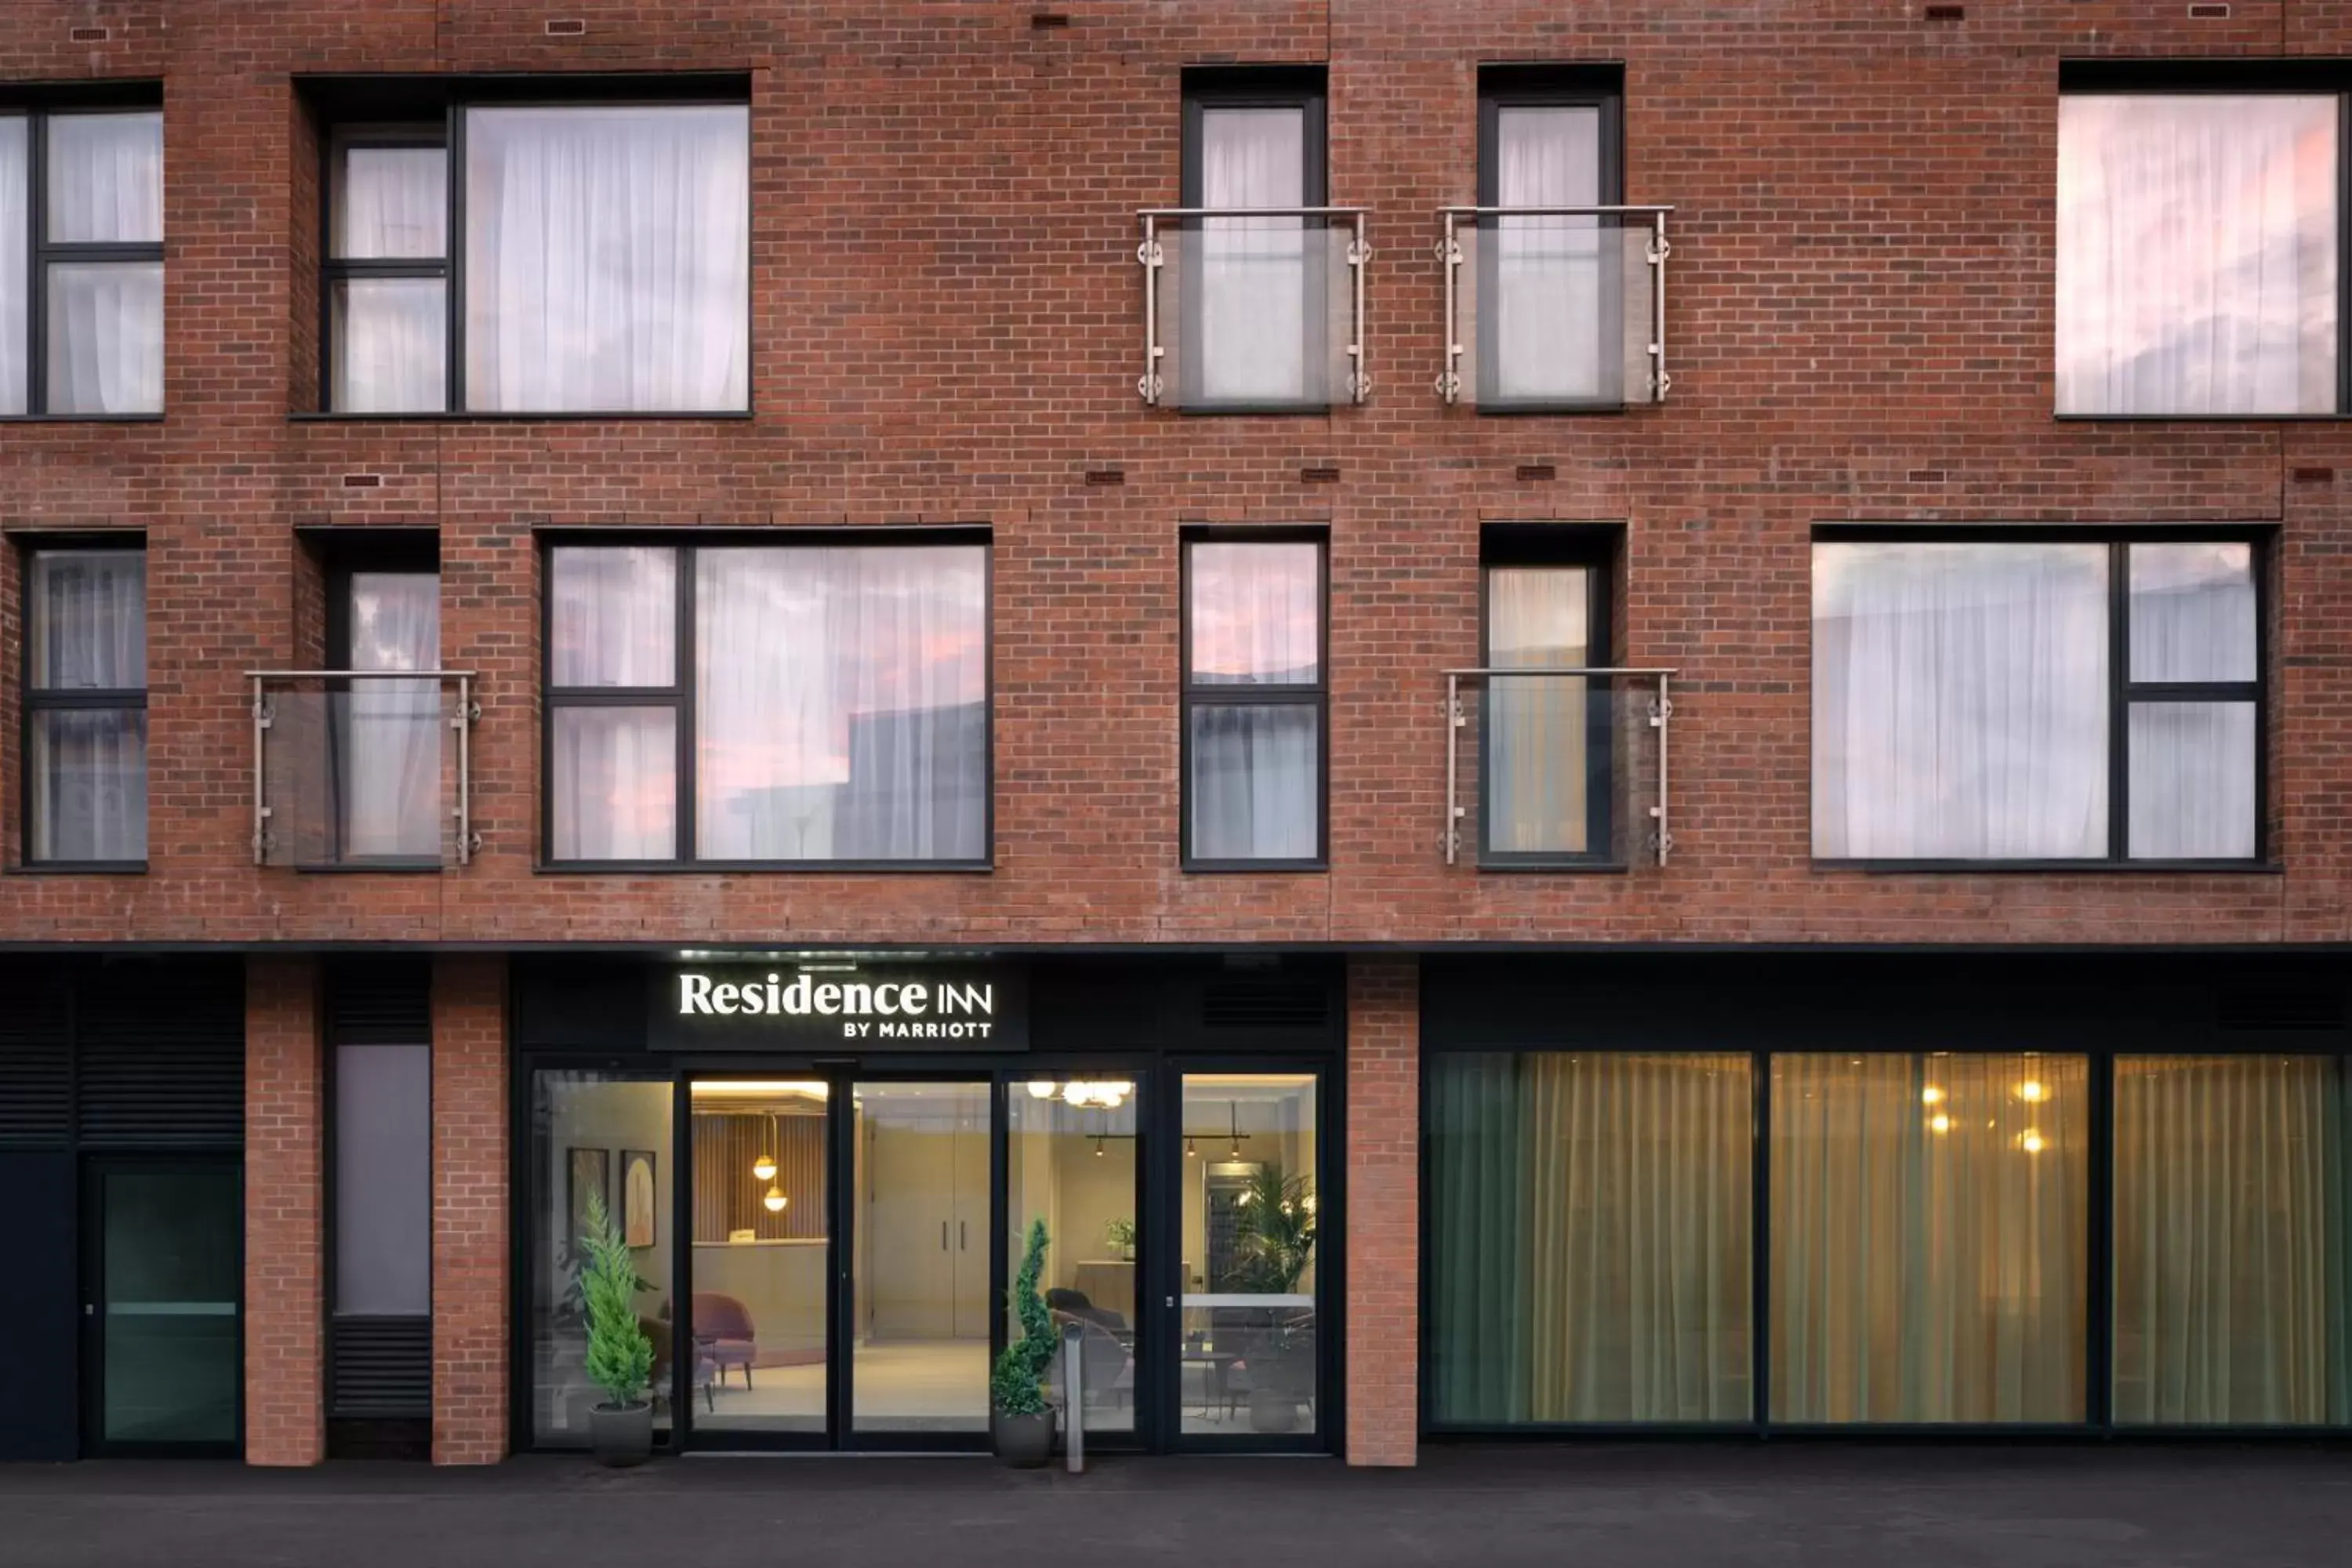 Property Building in Residence Inn by Marriott Manchester Piccadilly